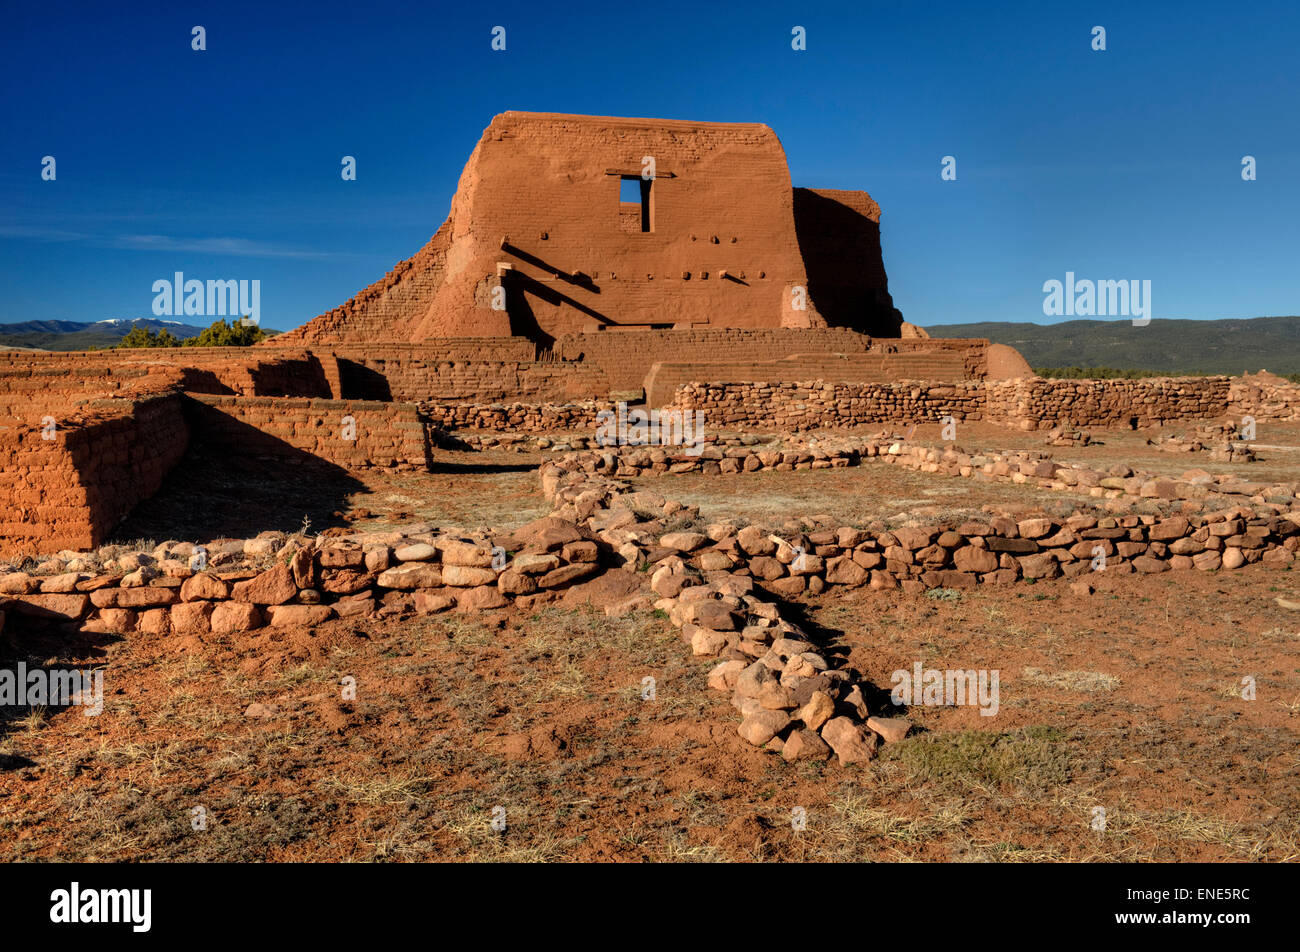 Ruins of the old (early 1700's) mission church and convento at the Pecos pueblo, New Mexico. Stock Photo